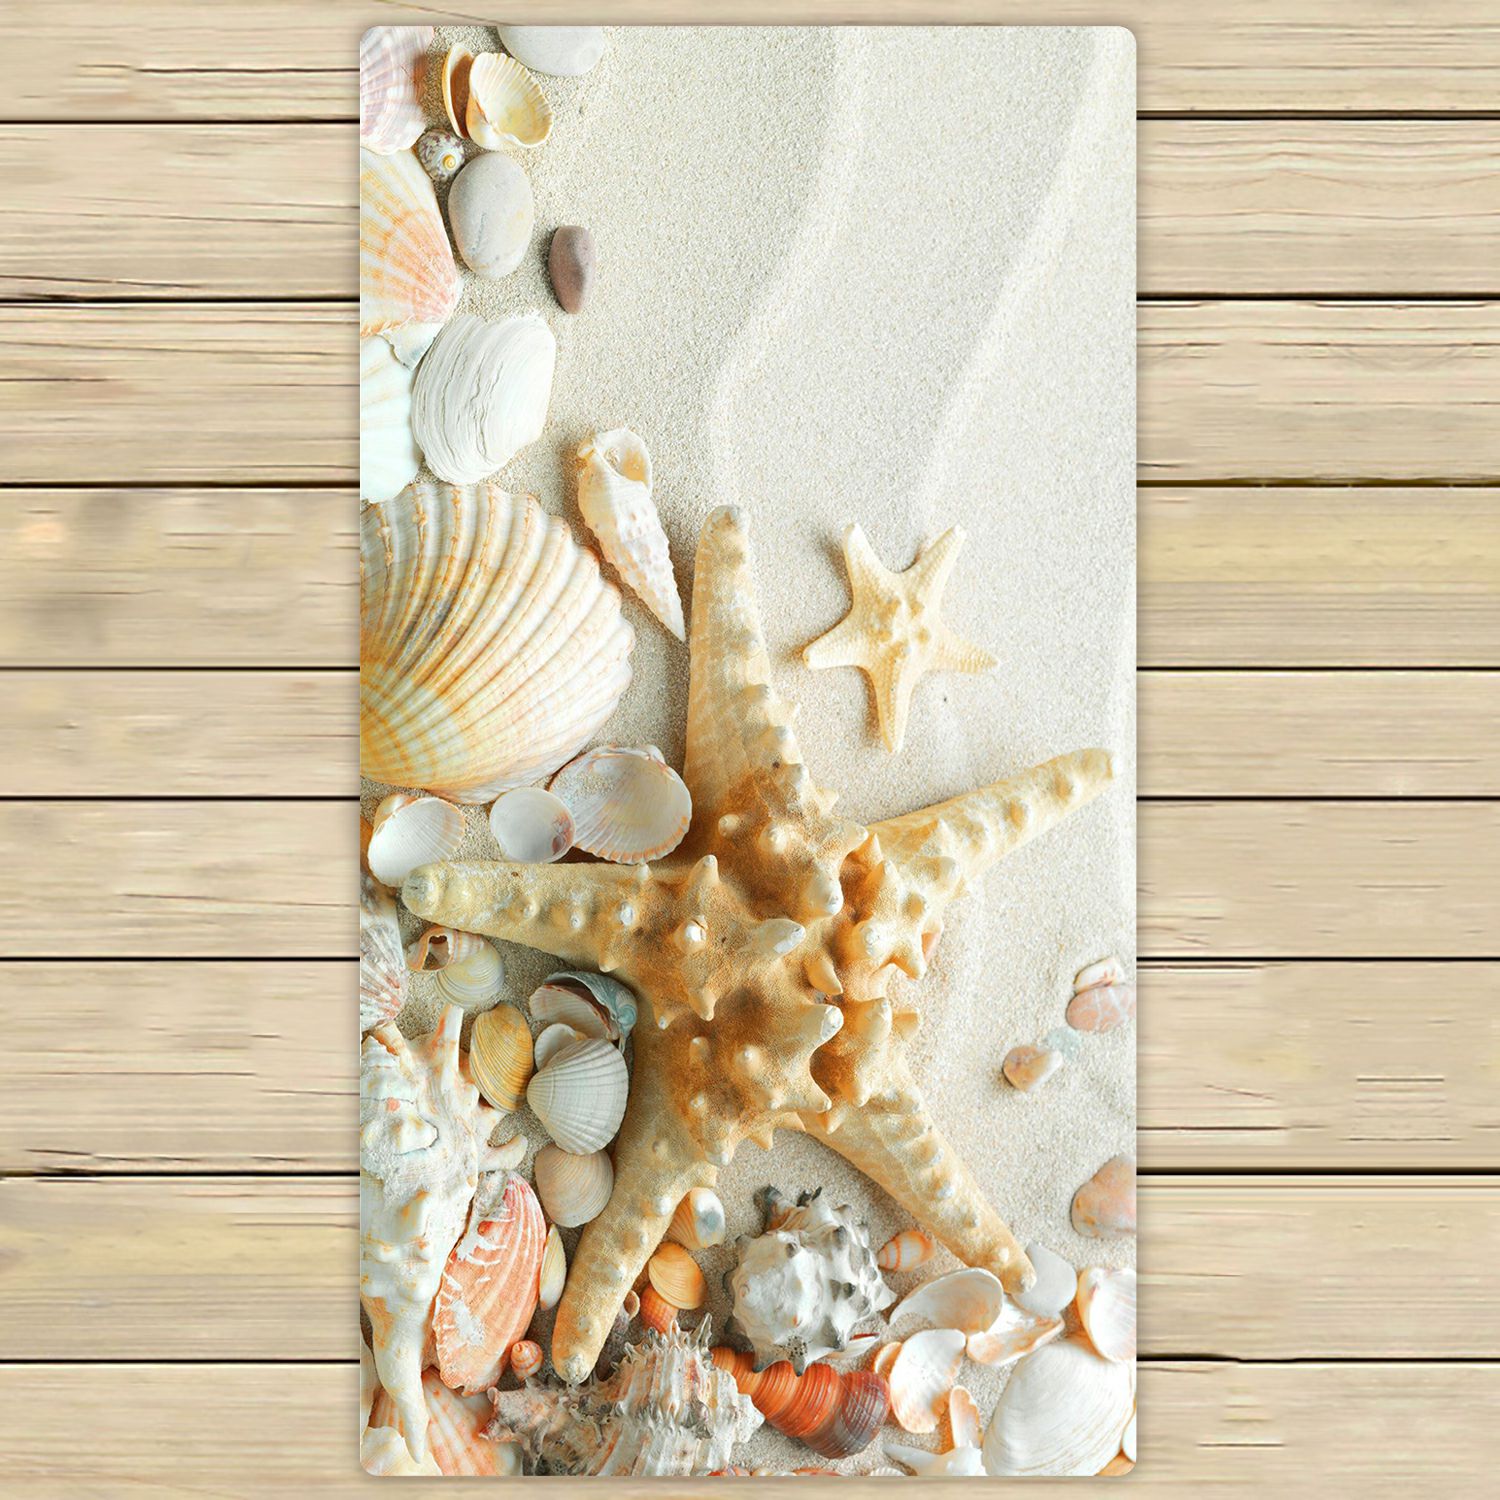 ZKGK Summer Beach with Starfish Sea Shells Hand Towel Bath Towels Beach Towel For Home Outdoor Travel Use Size 30x56 Inches - image 1 of 3